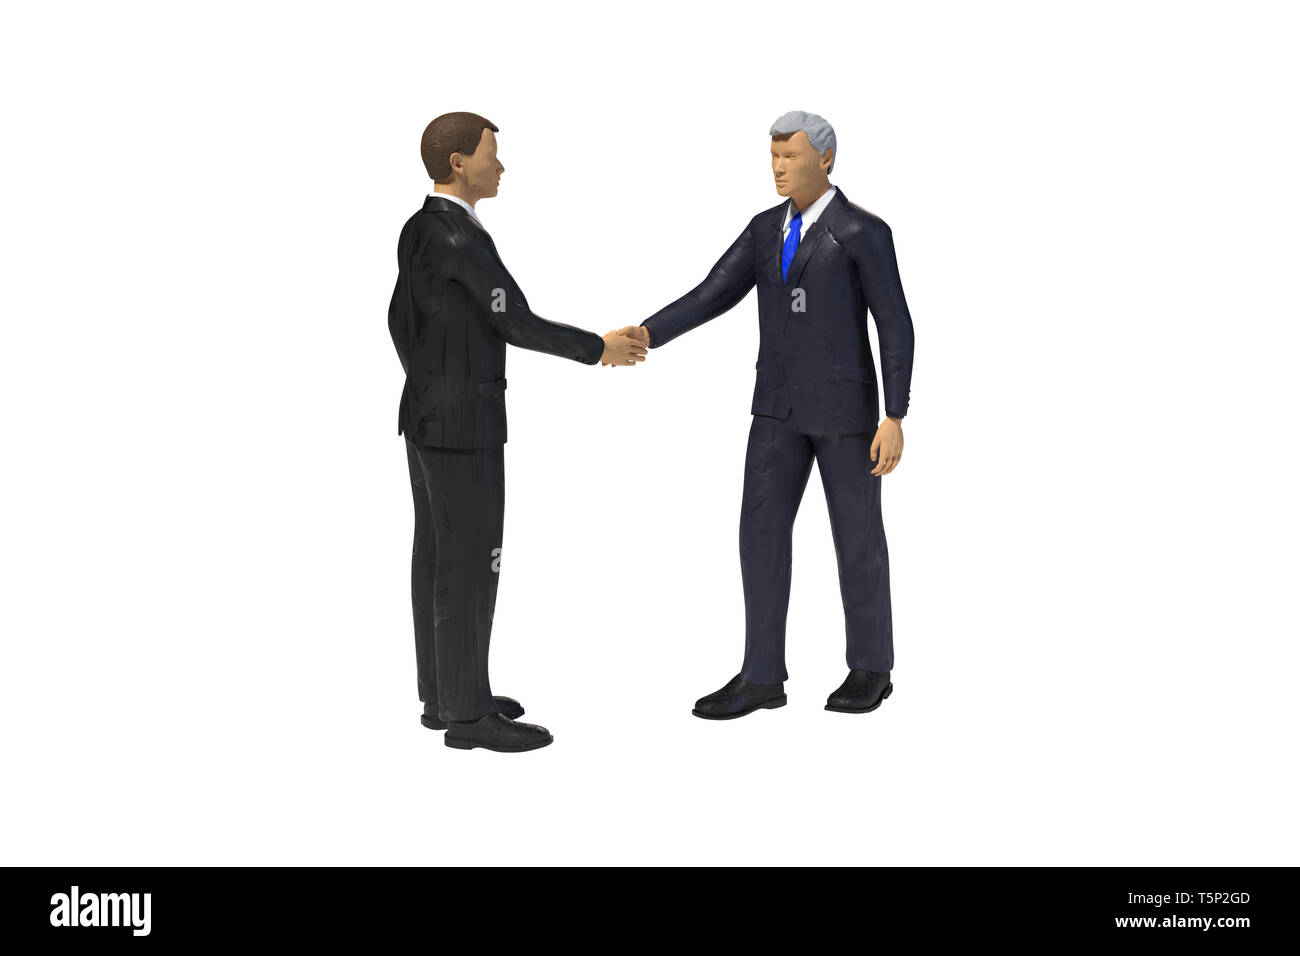 two toy miniature figure businessmen shaking hands, isolated on white background Stock Photo